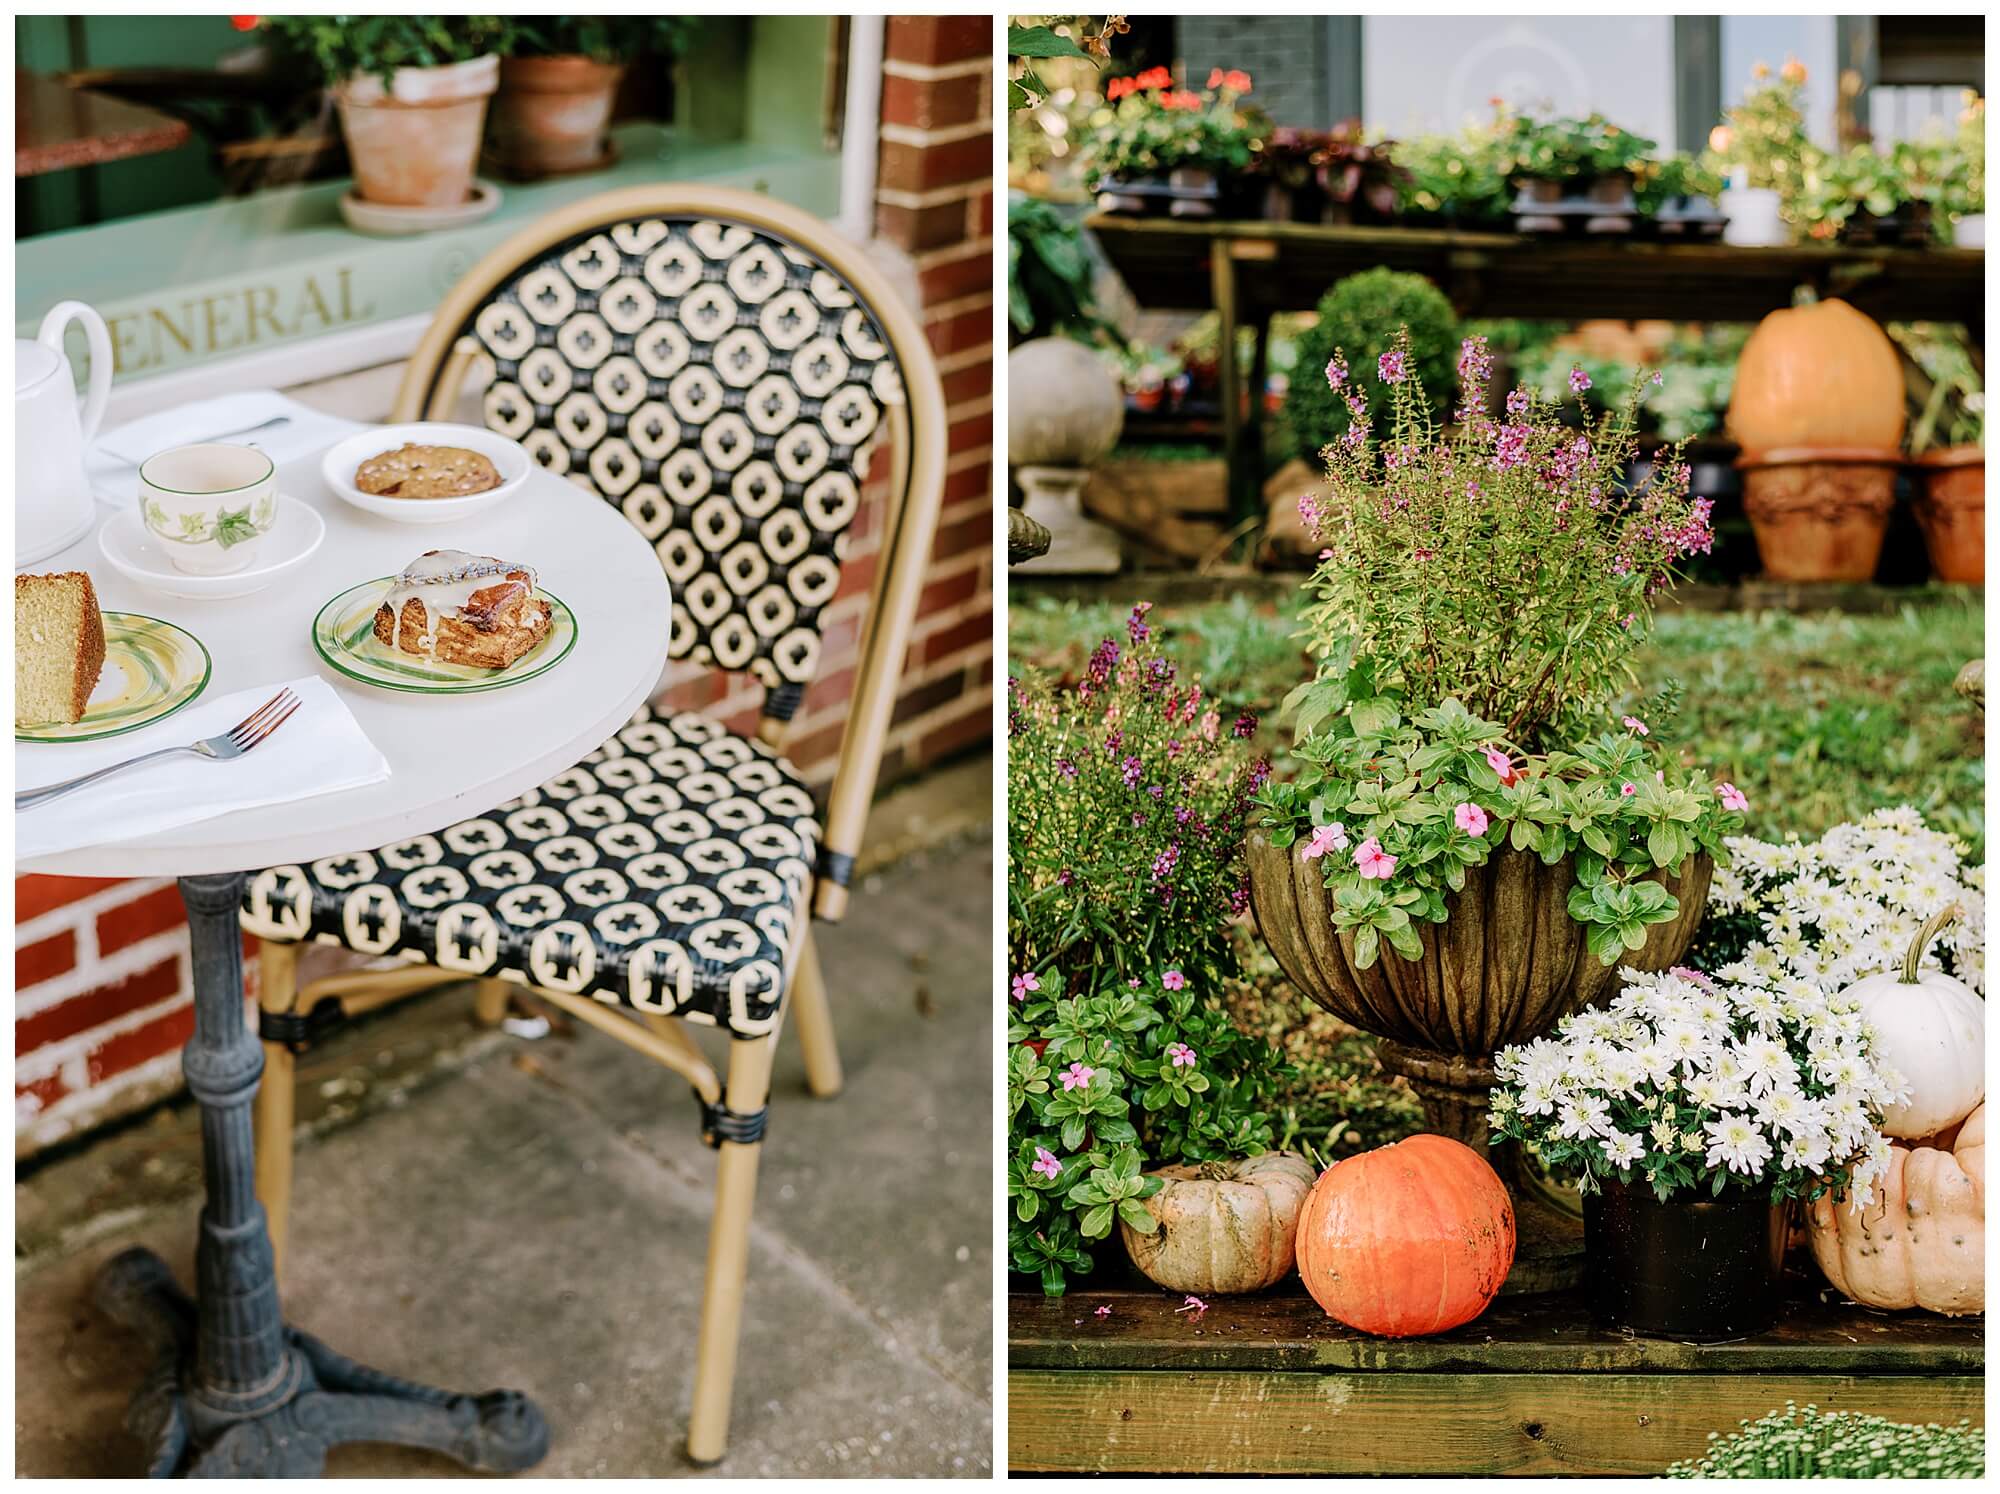 Left: French-style café chair and table with pastries at General Birmingham right: planter with flowers and pumpkins at Shoppe Birmingham